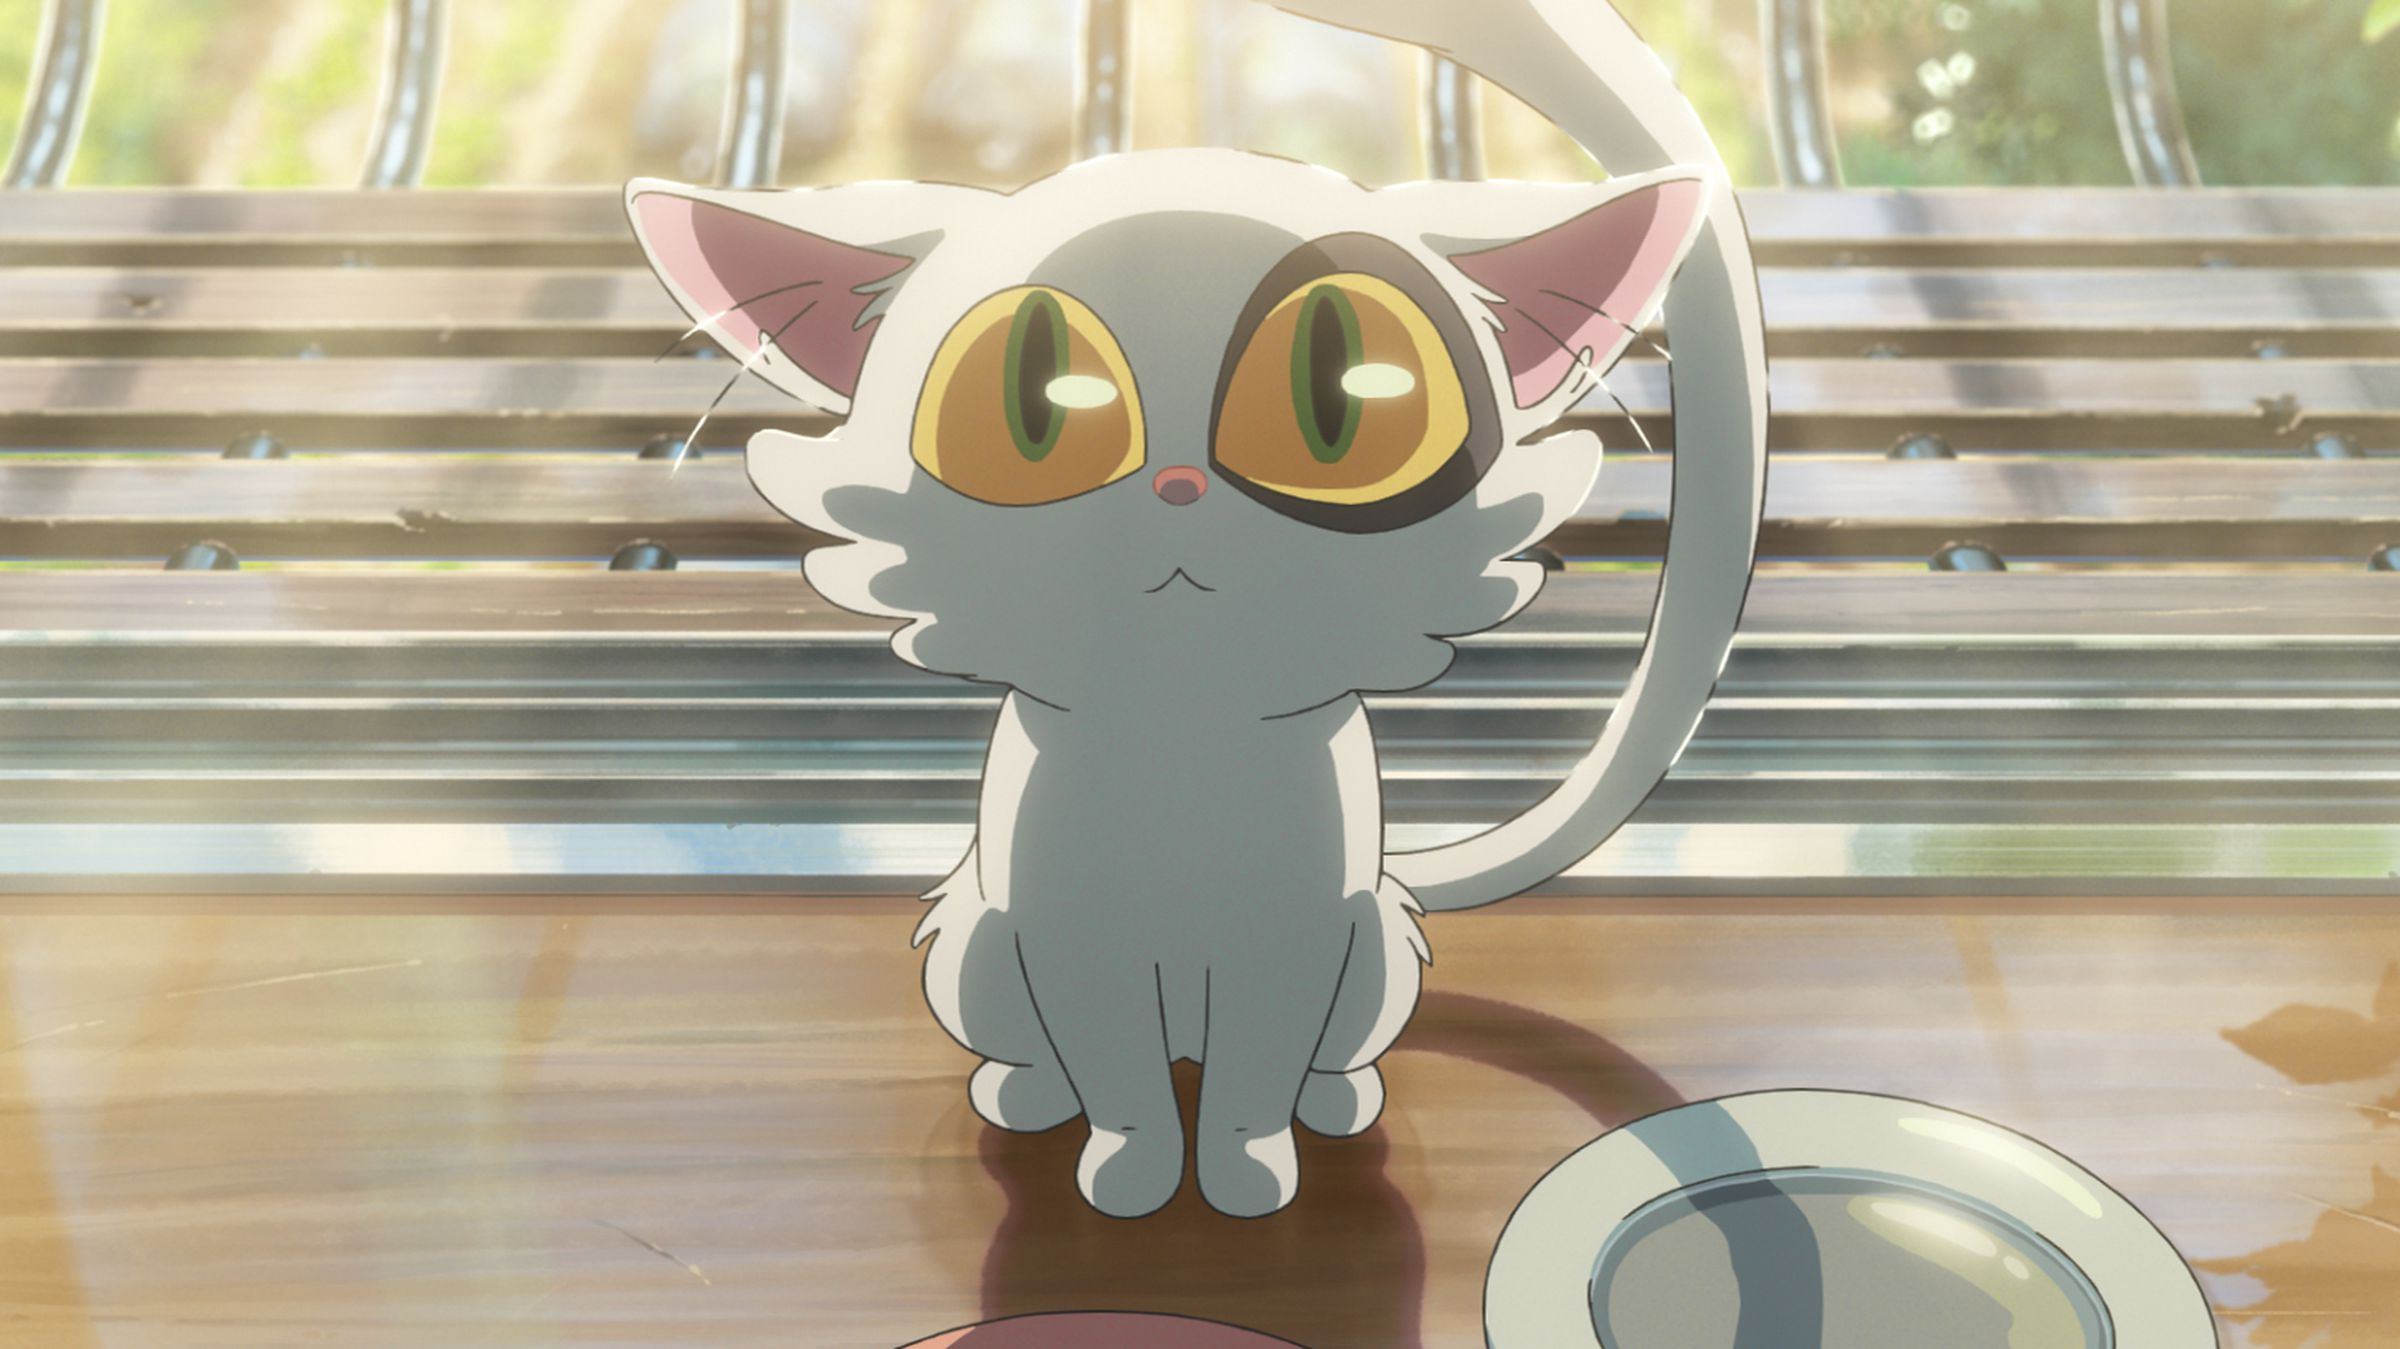 An image of a cat from the anime film Suzume.